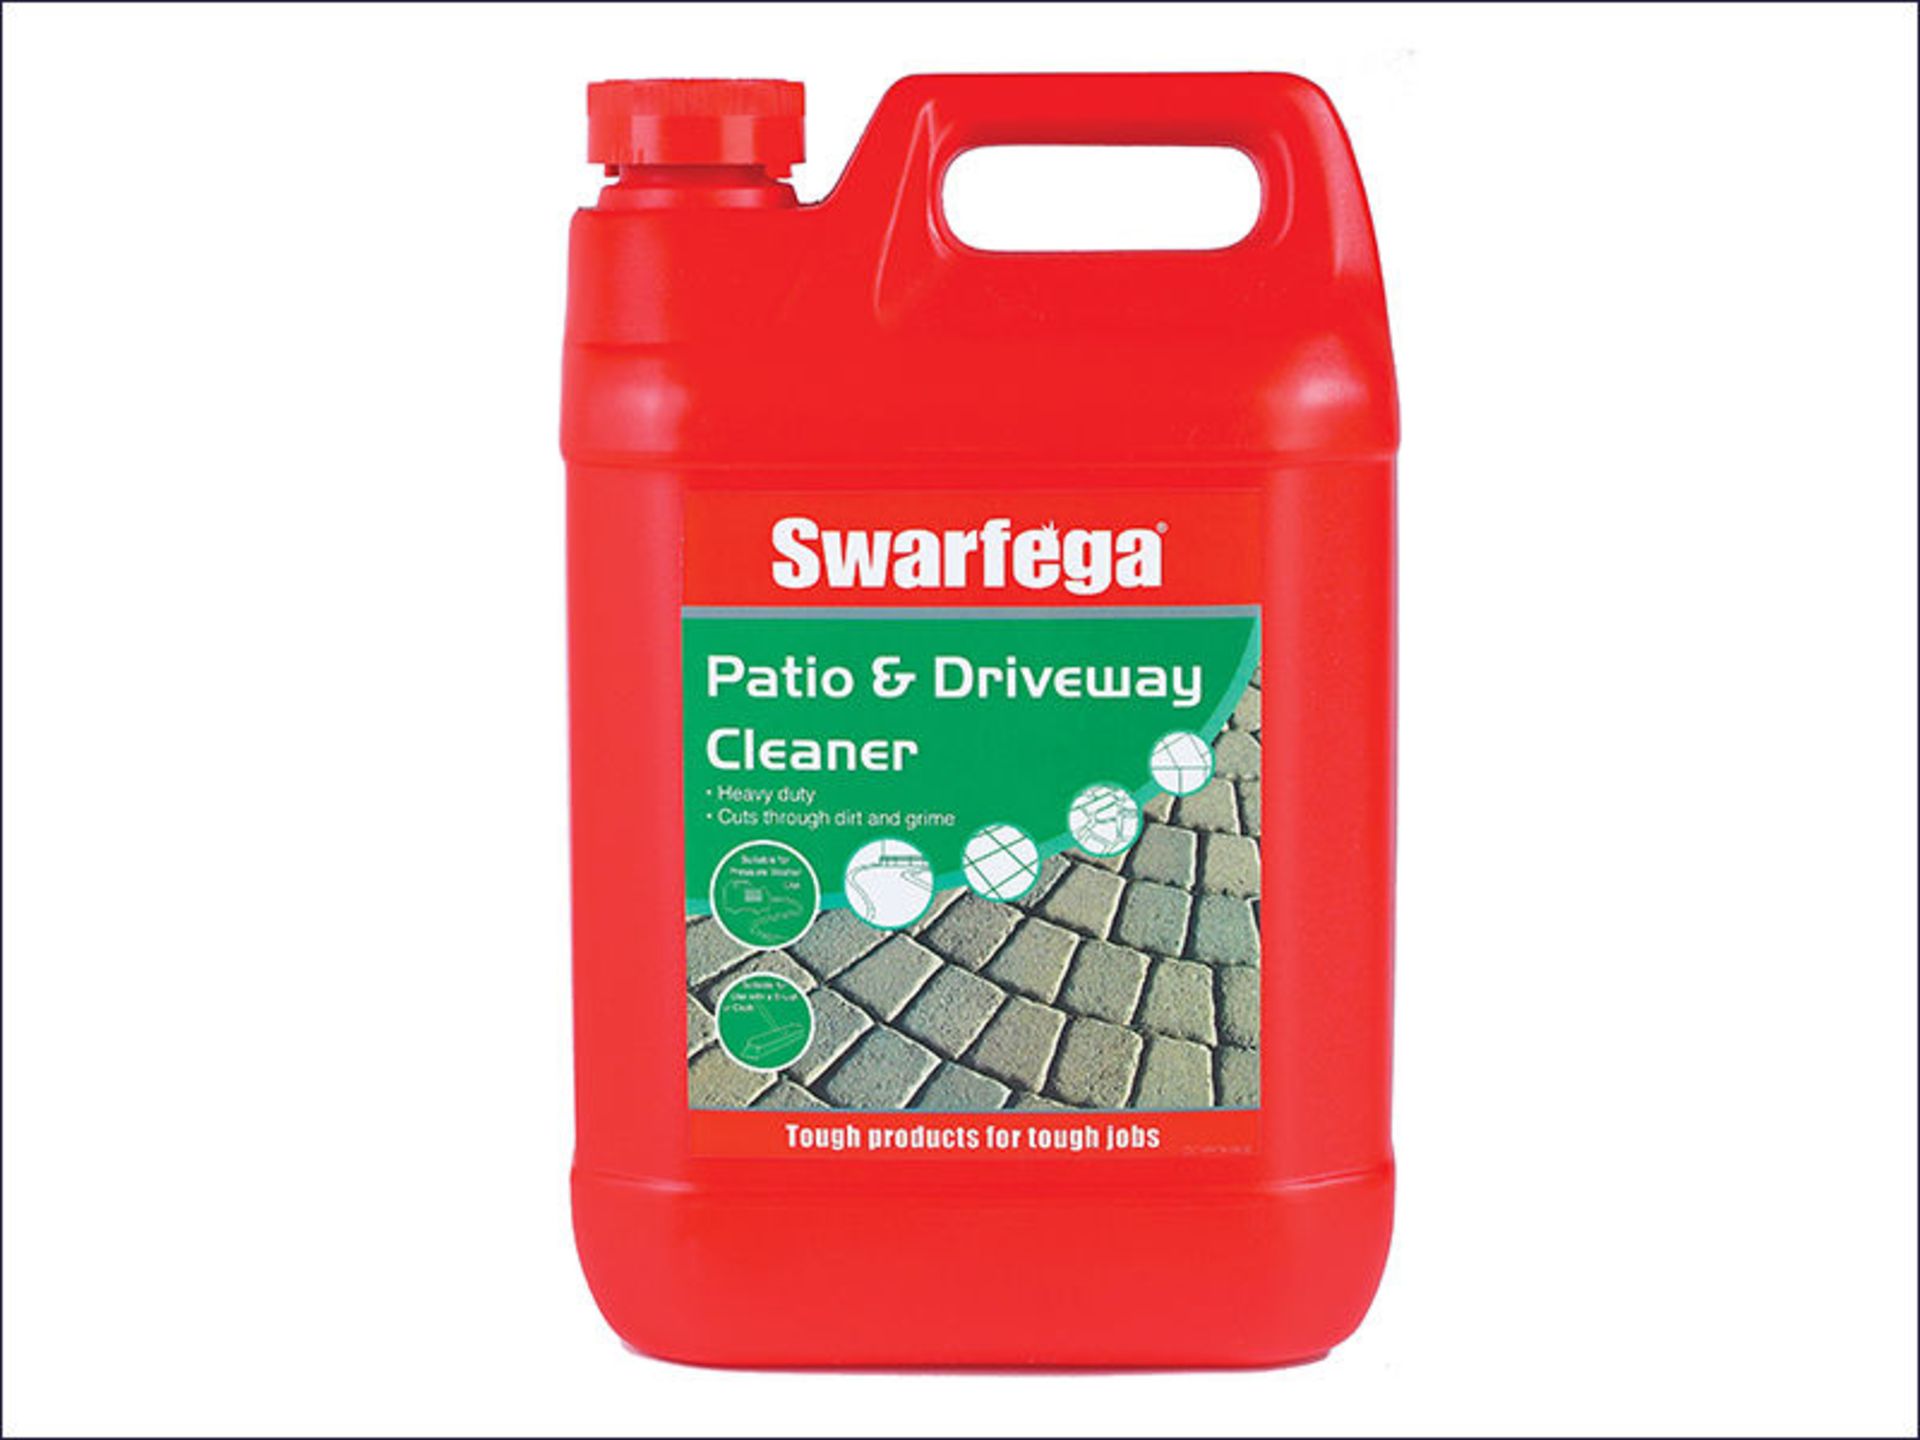 V Brand New 5 Litres Swarfega Patio & Driveway Cleaner - Heavy Duty - Cuts Through Dirt And